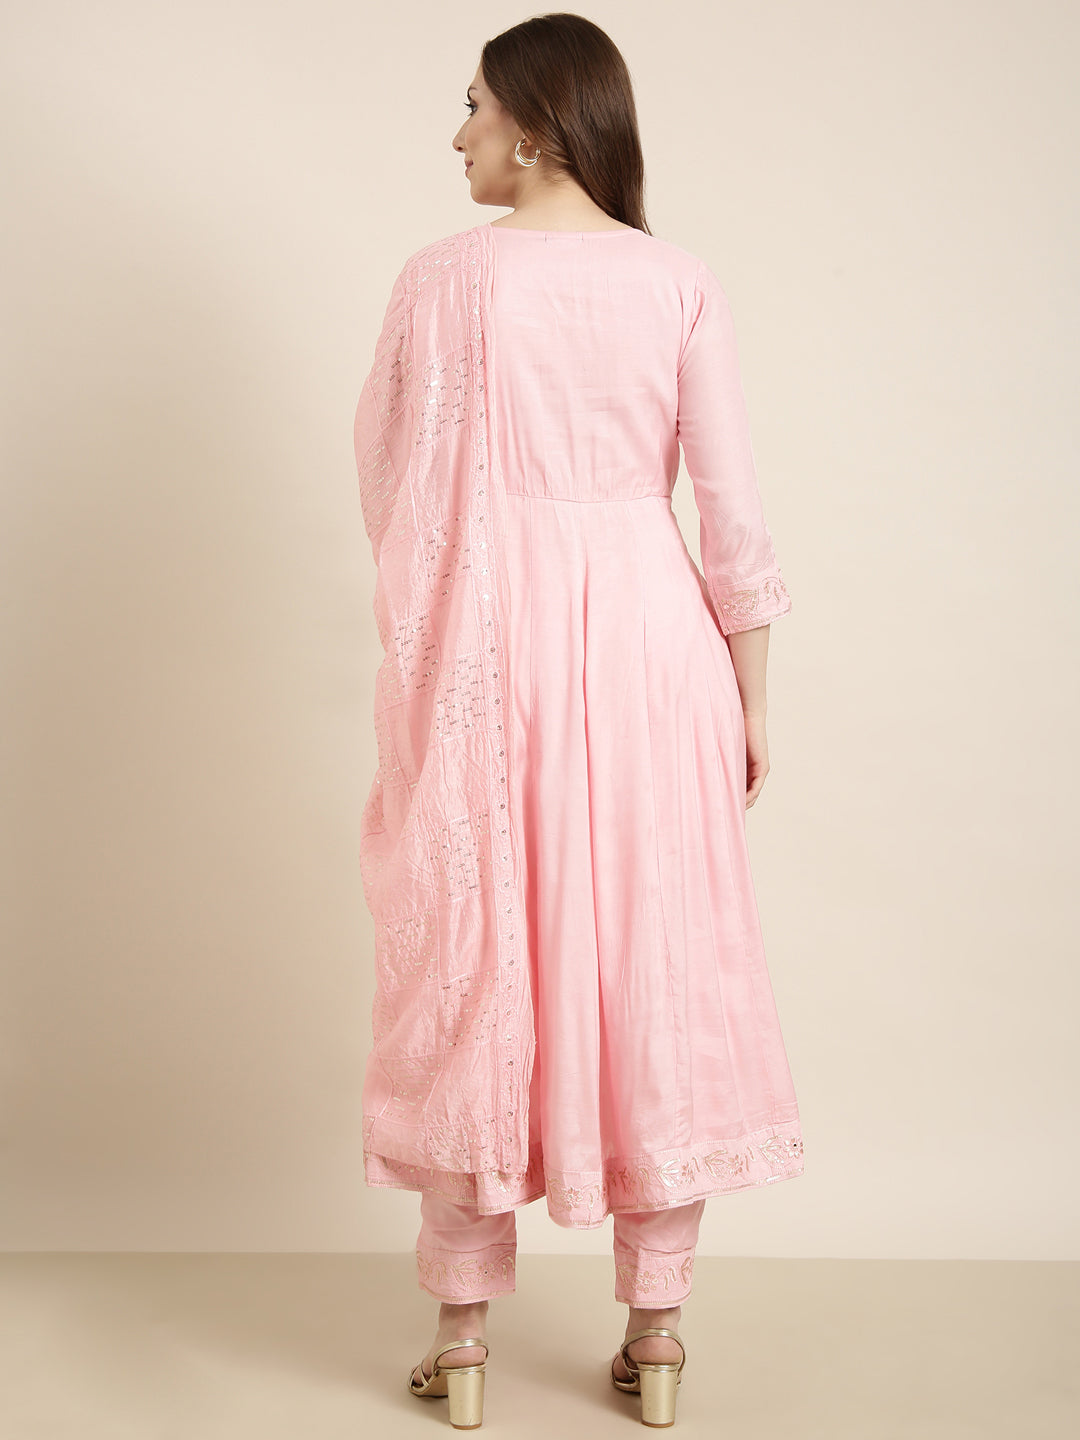 Women Anarkali Pink Solid Kurta and Trousers Set Comes With Dupatta